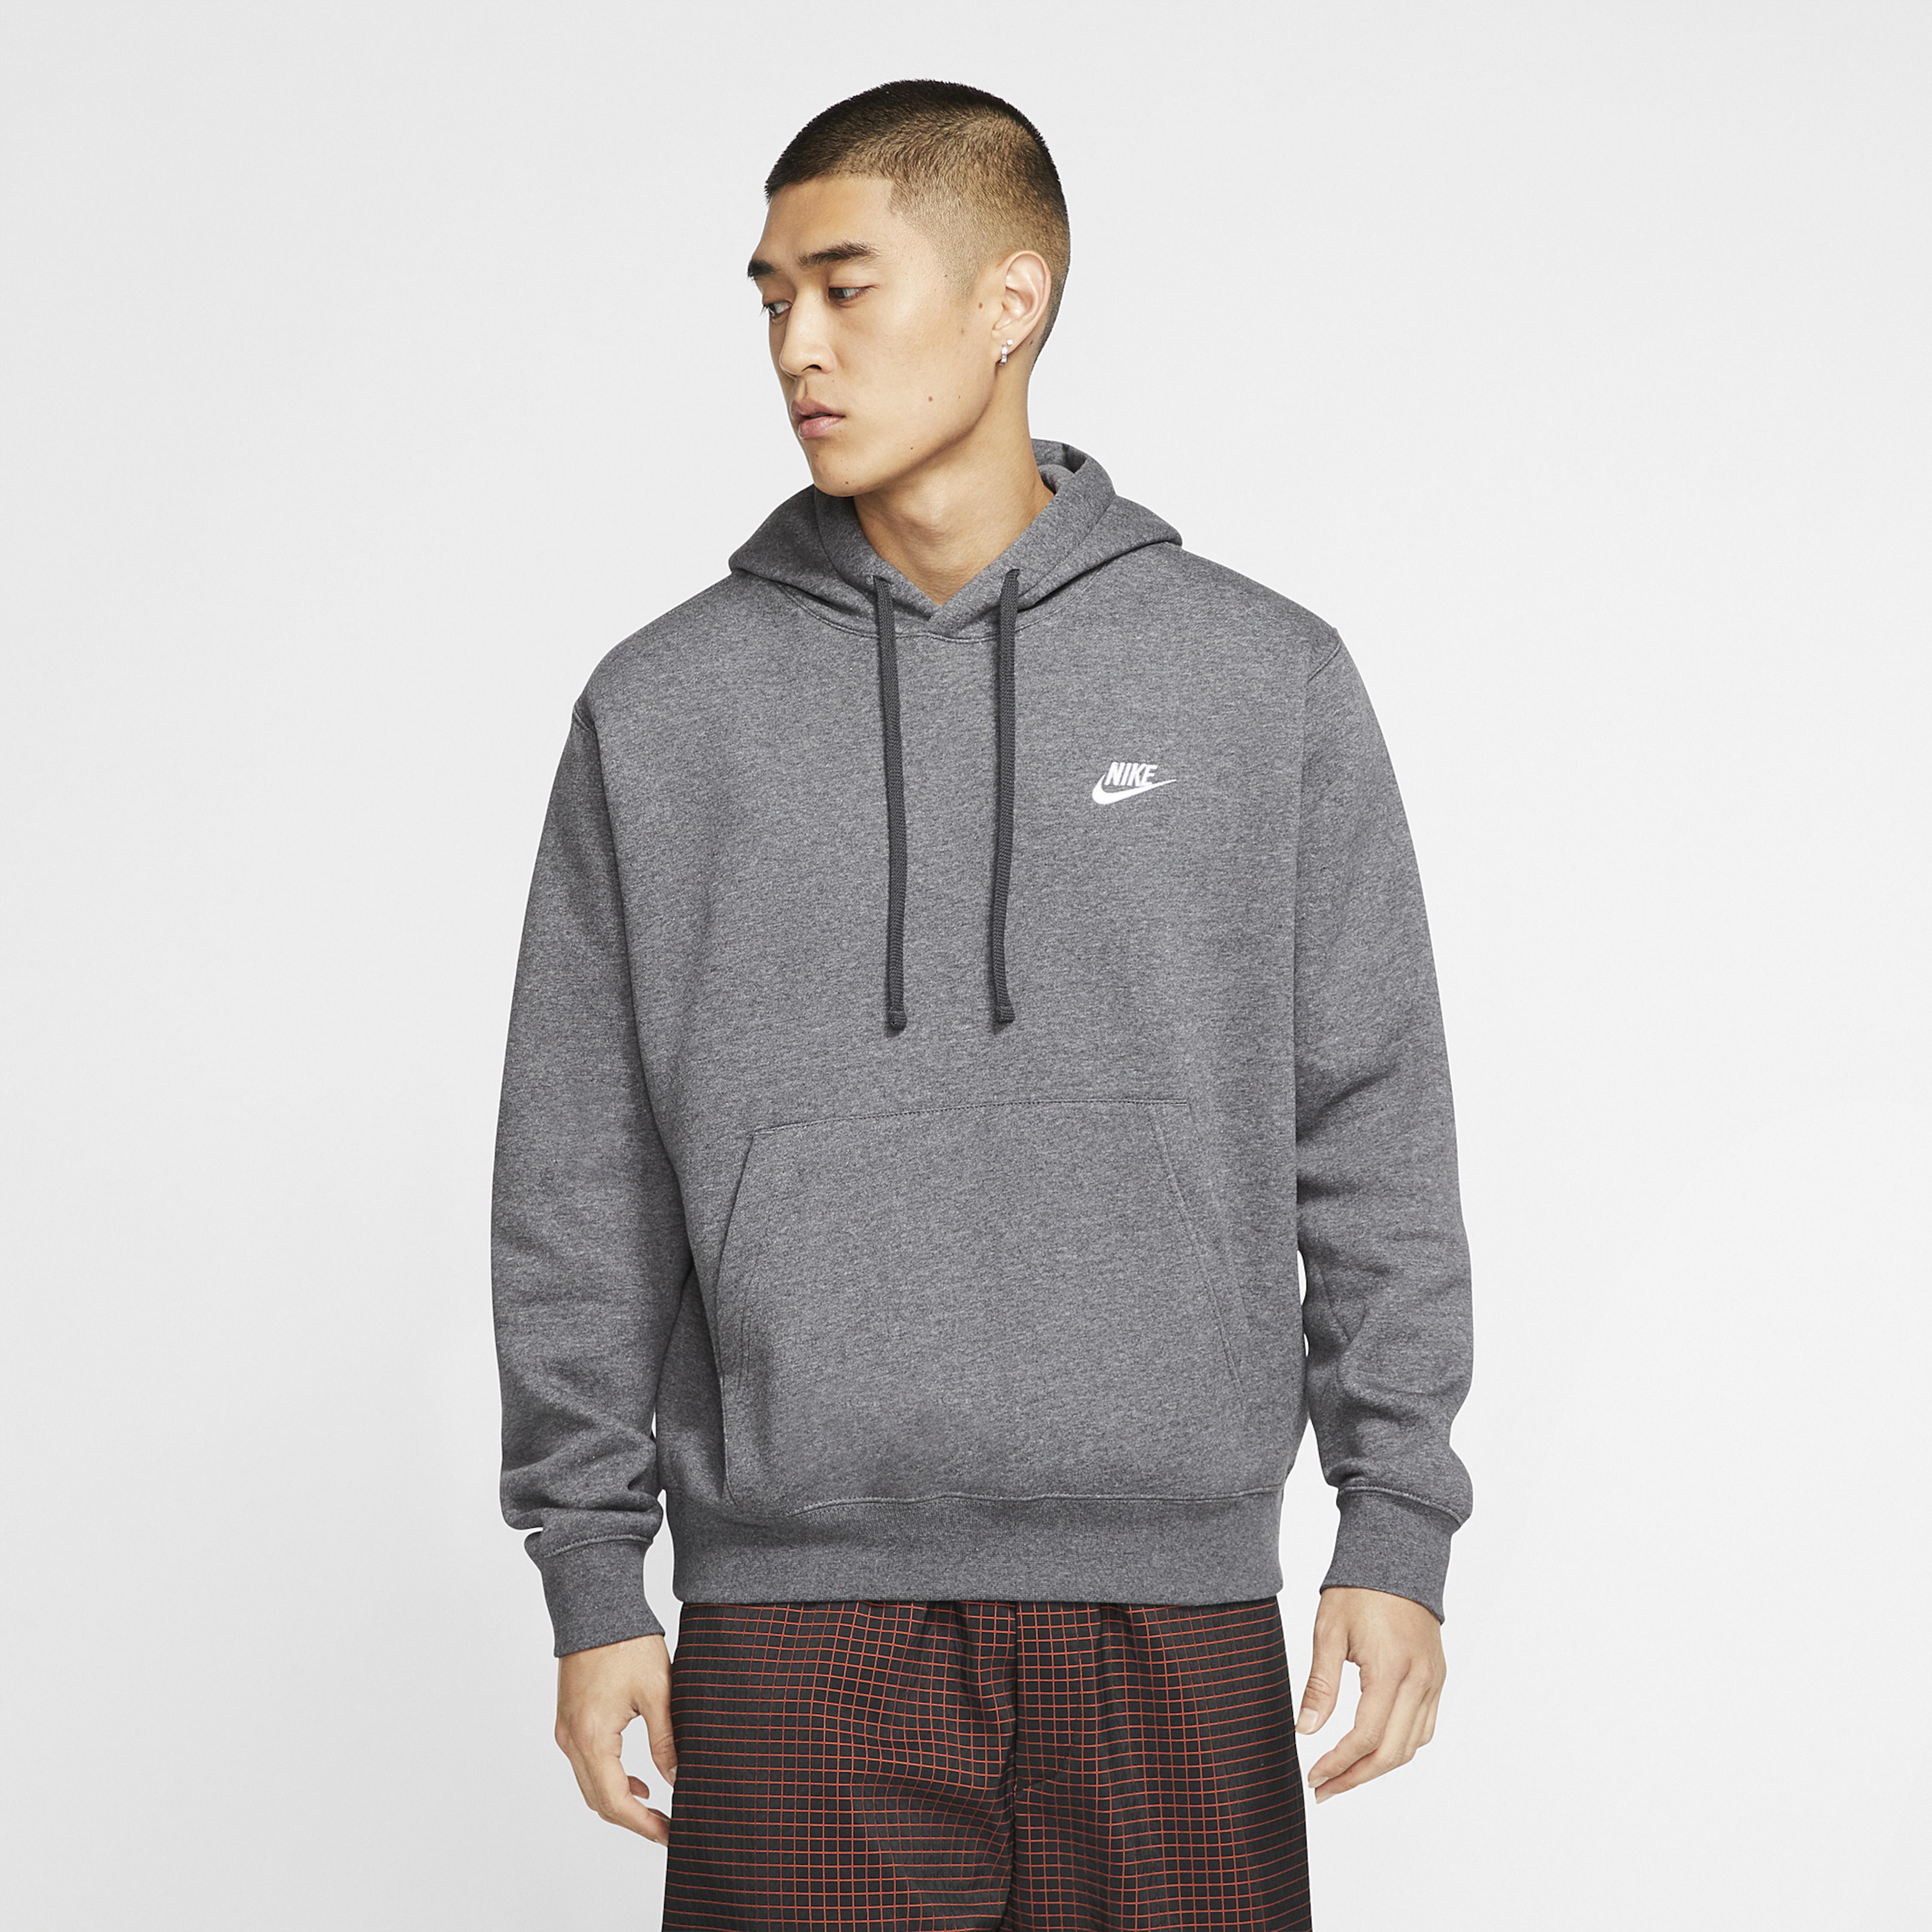 Nike Cotton Club Pullover Hoodie in Gray for Men - Save 10% - Lyst